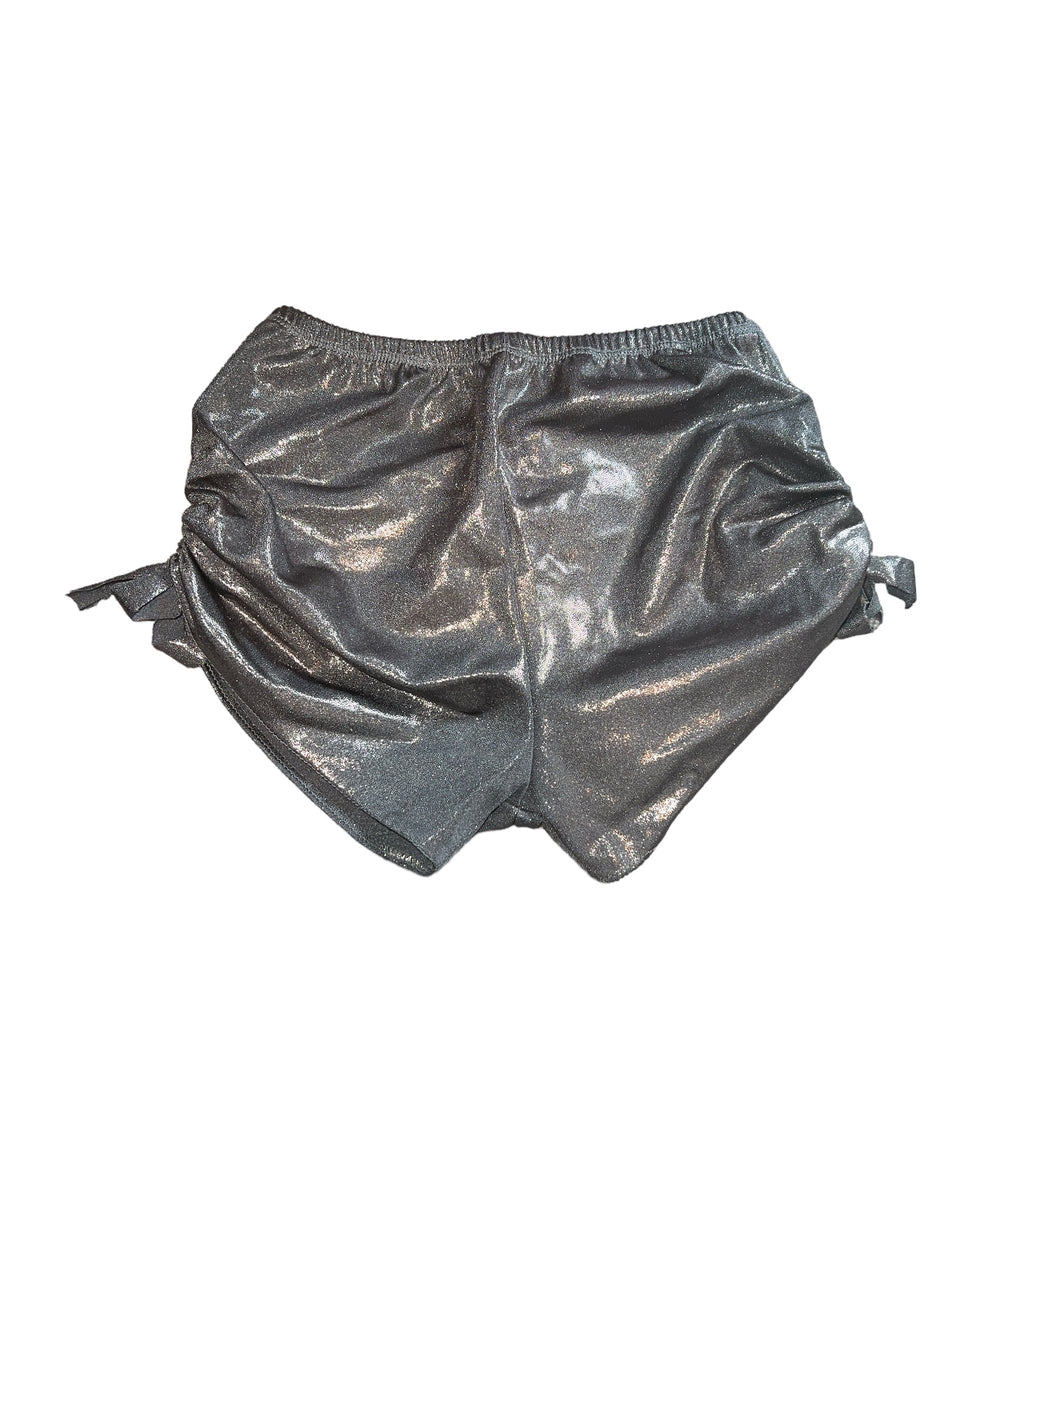 Hope Jeans girls metallic silver cinched shorts 10